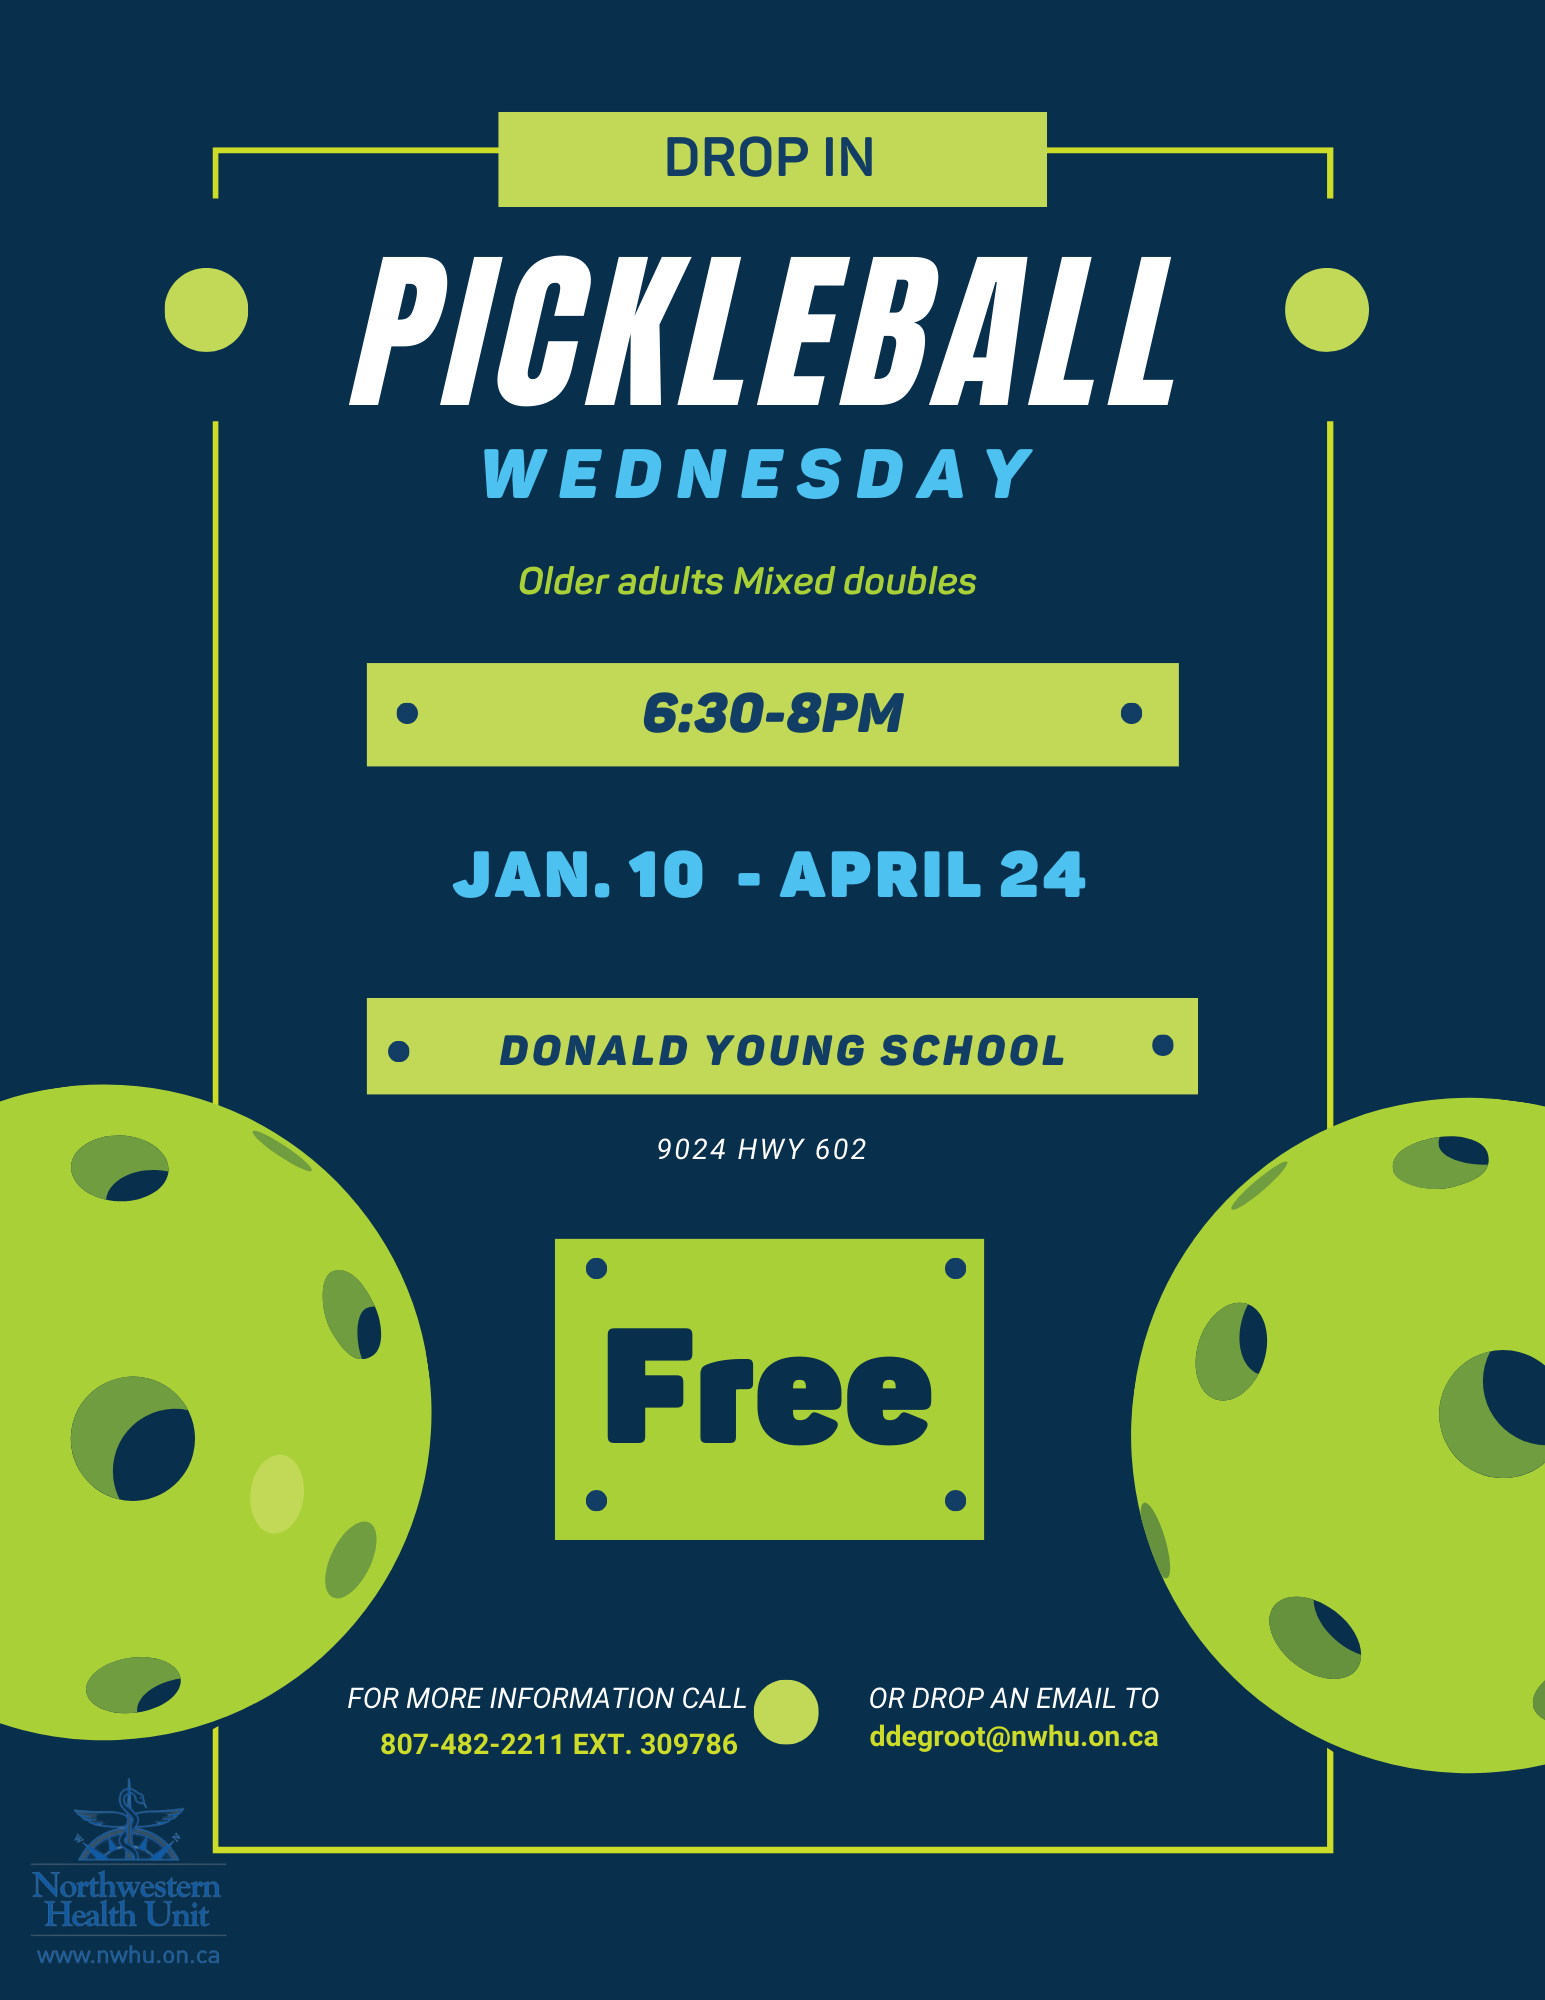 Come Out to the Adult Pickle Ball session. This takes place at Donald Young School every Wednesday from January 10 to April 24, 2024. This is a great form of exercise and fun!